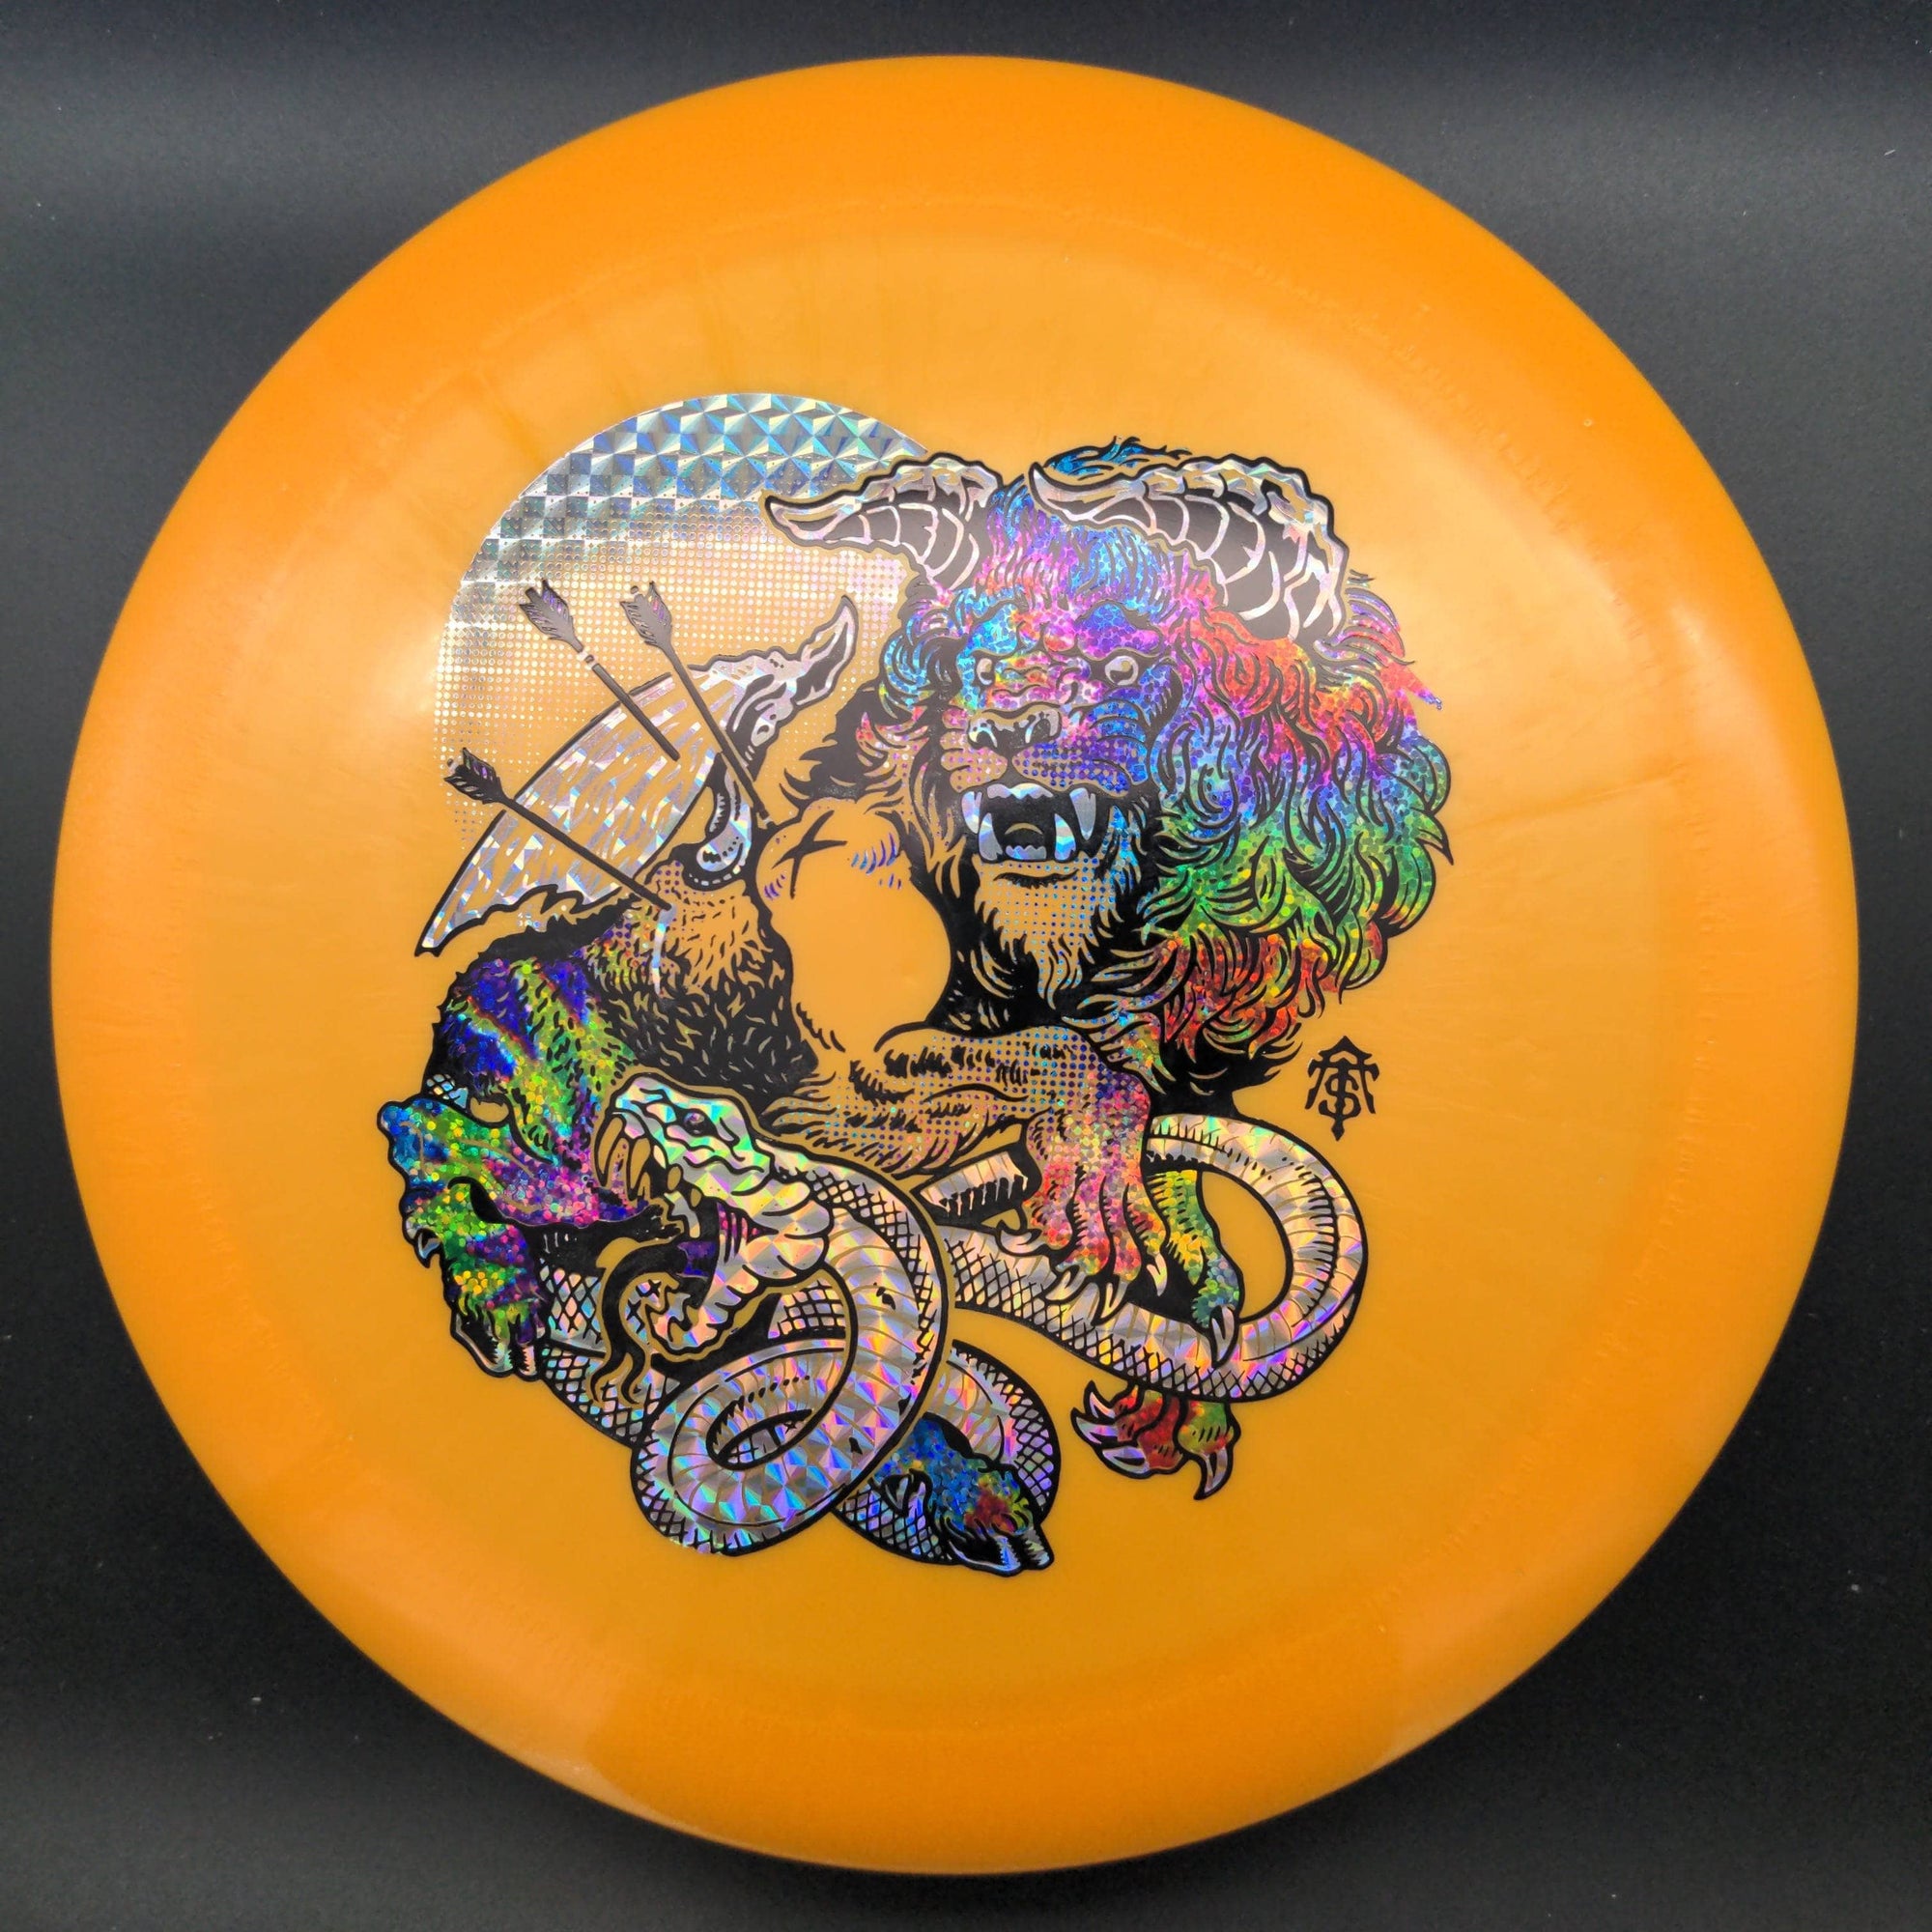 Infinite Discs Distance Driver Orange Partytime/Silver Shimmer 175g Emperor, G-Line, Thought Space Stamp